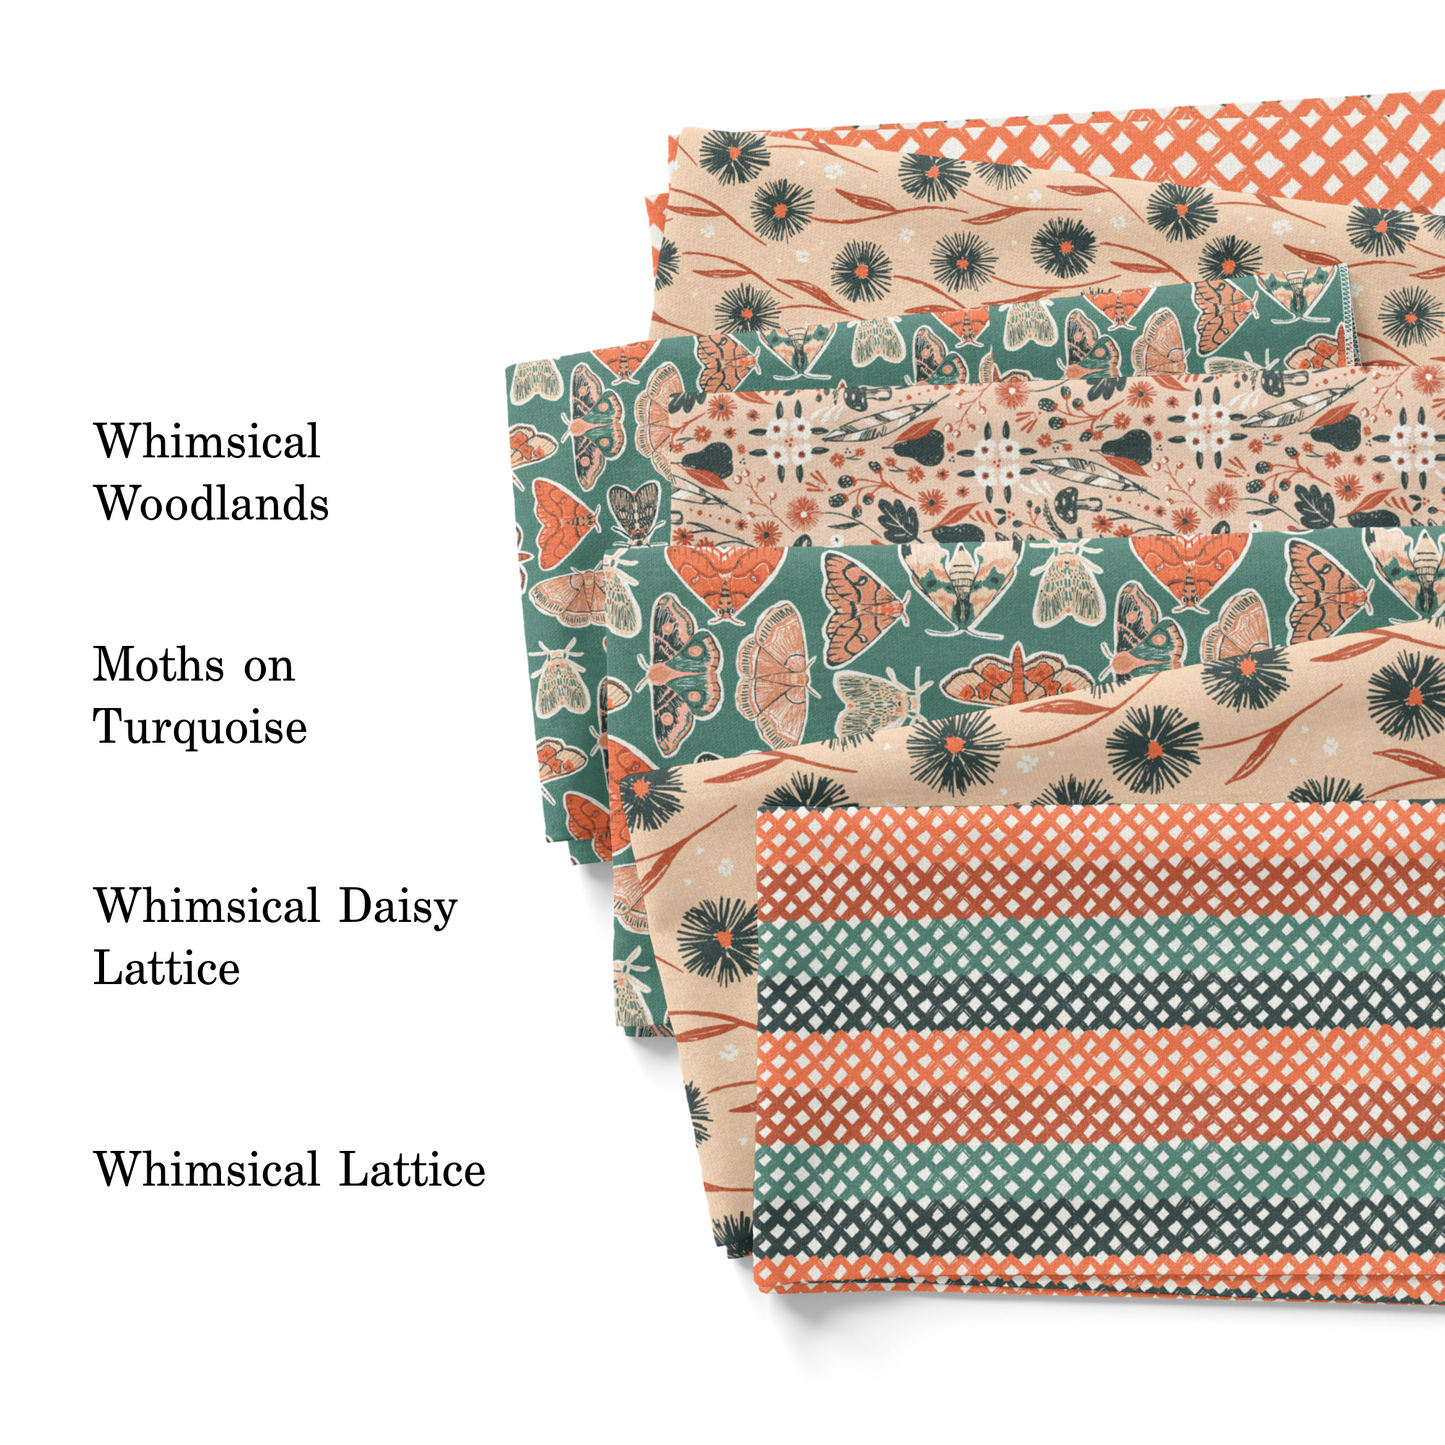 Whimsical Woodlands Fabric By The Yard